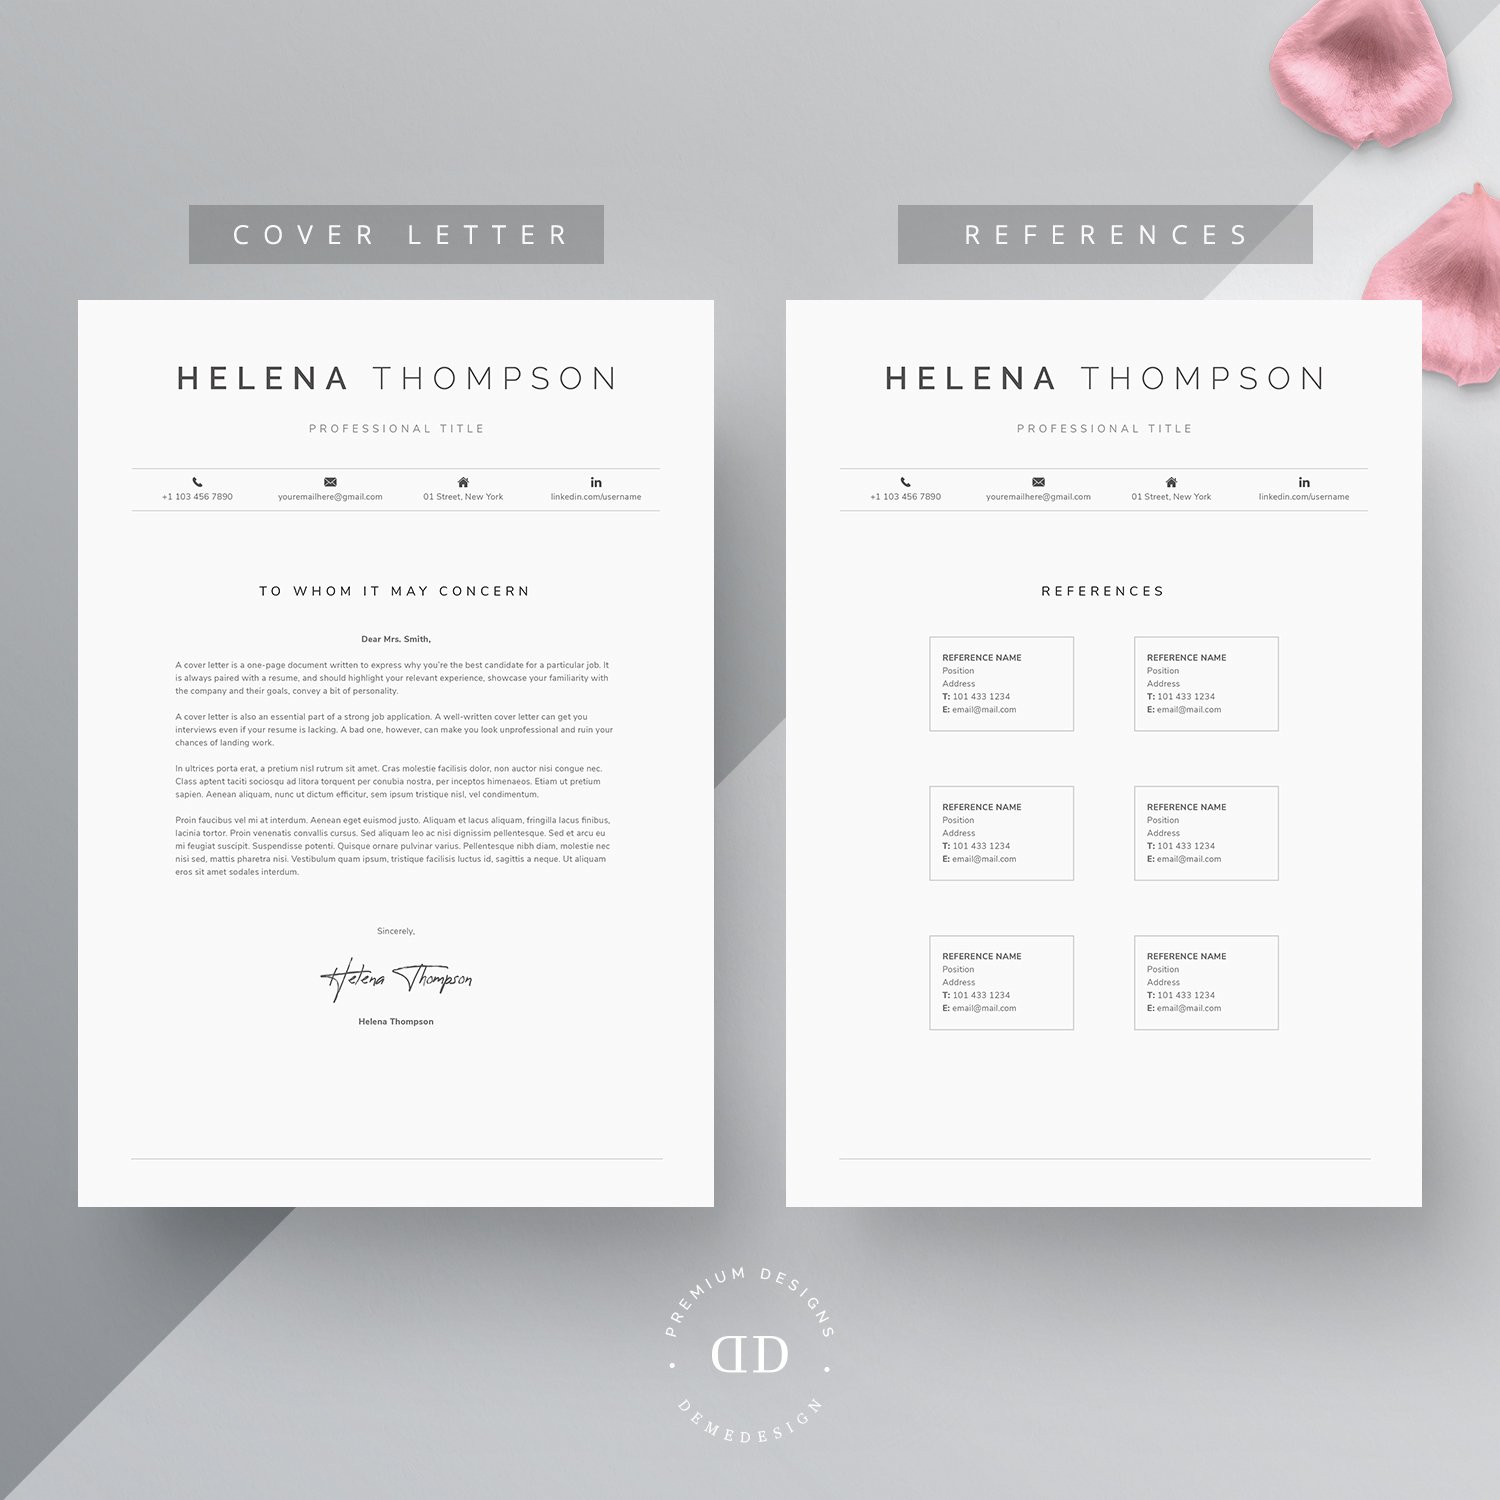 job cover letter template word